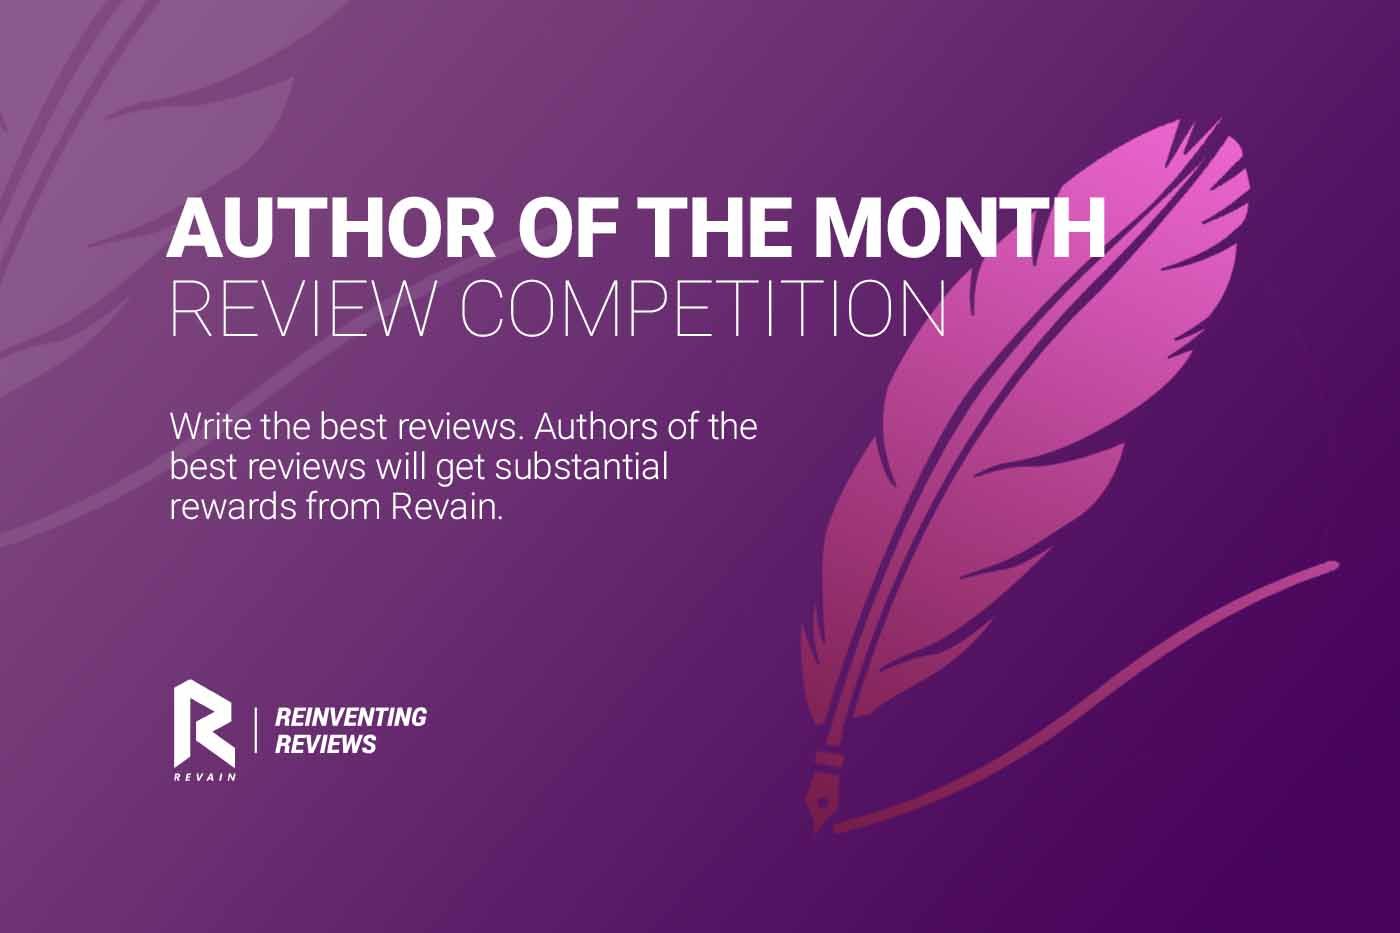 REVAIN AUTHOR OF THE MONTH COMPETITION